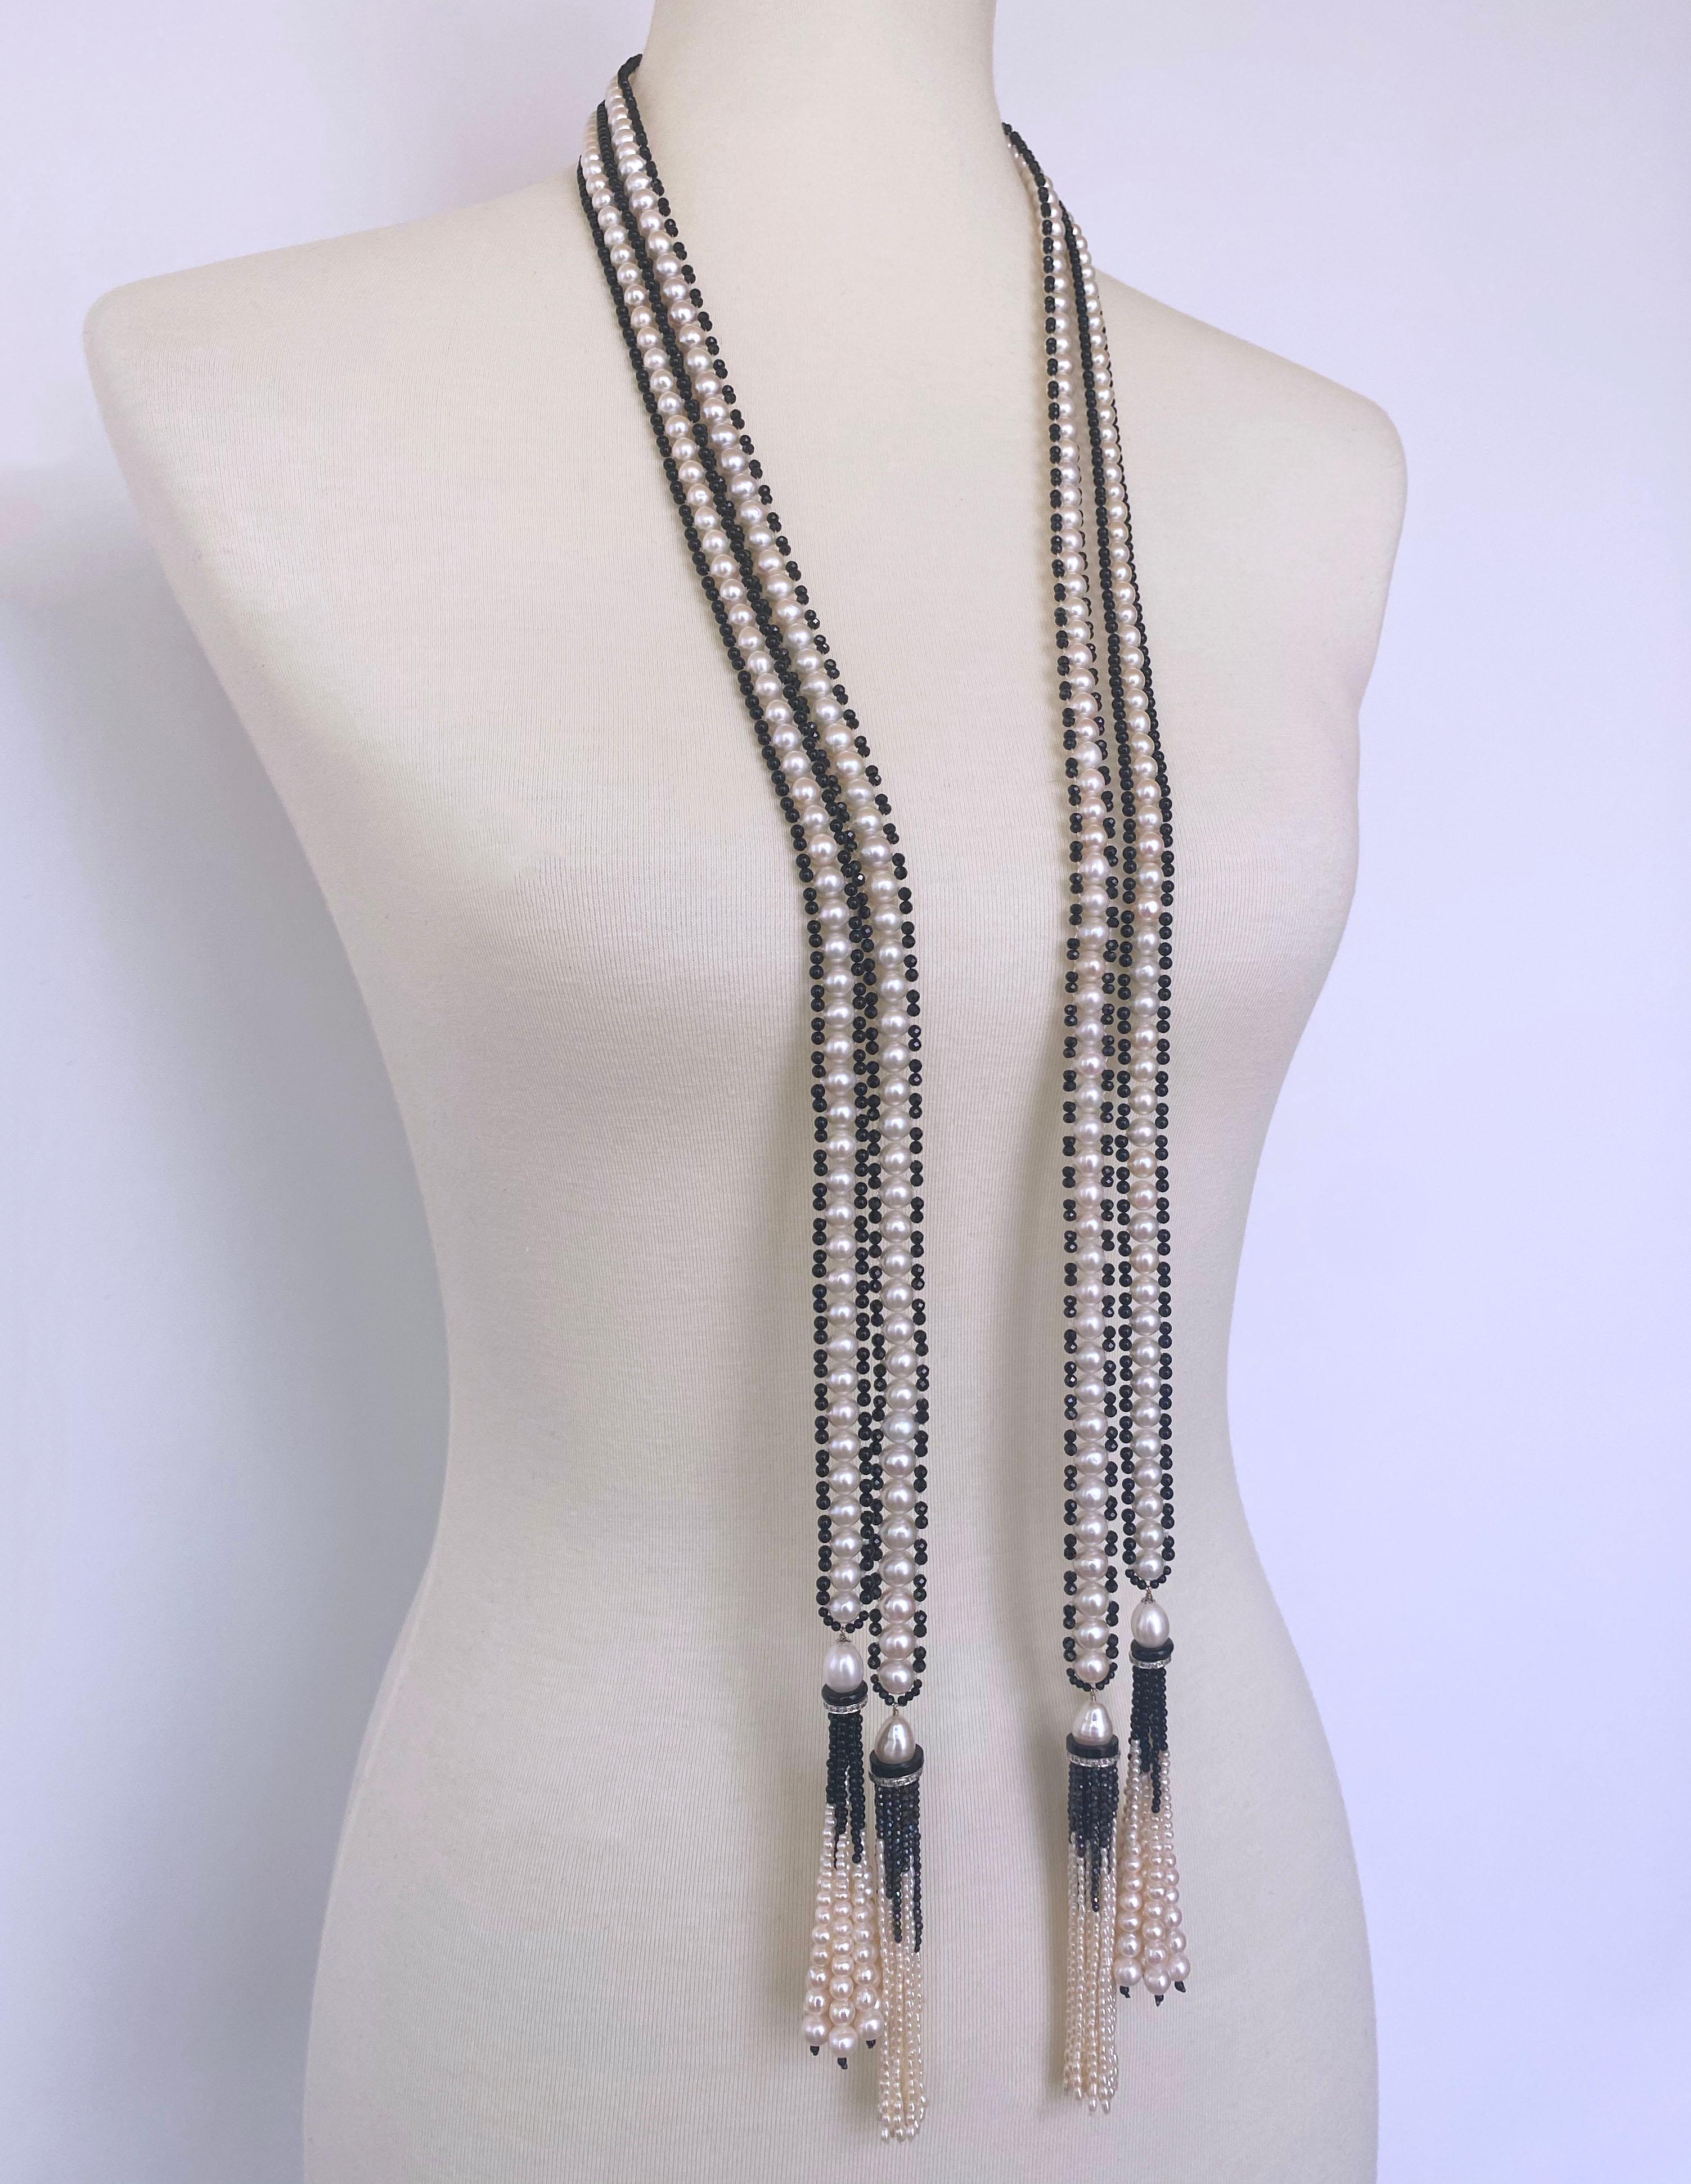 Marina J. Art Deco Inspired Pearl & Black Onyx Sautoir with Graduated Tassels In New Condition For Sale In Los Angeles, CA